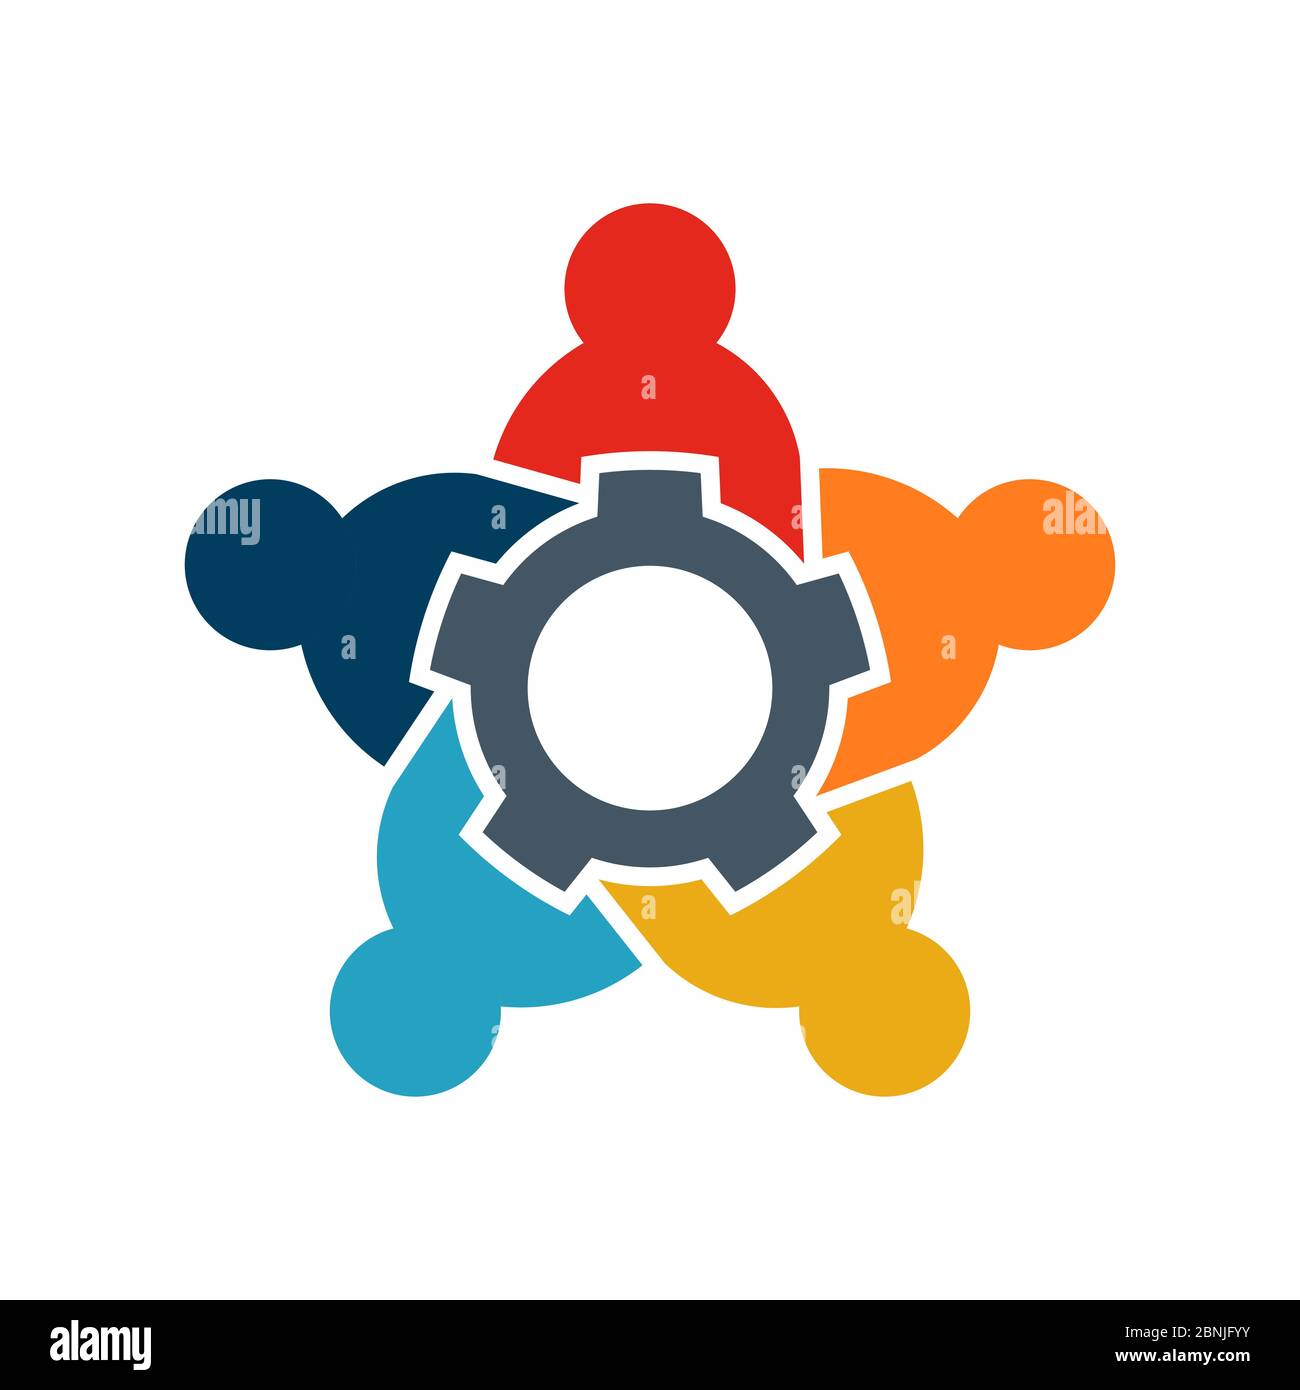 Teamwork of Five people logo. People group spinning gear concept